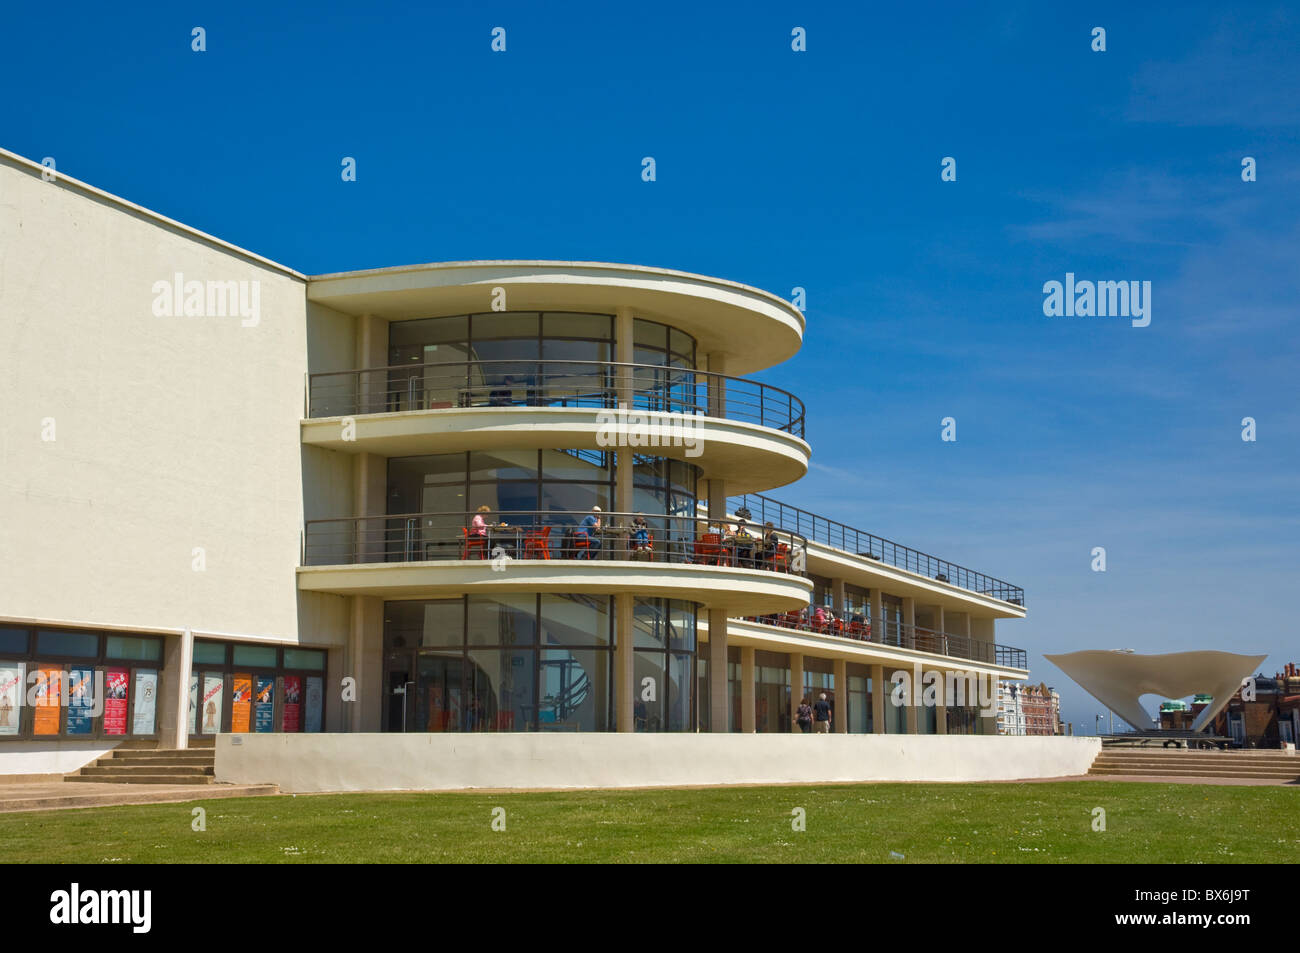 Outdoor stage for performances and exterior architecture, the De La Warr Pavilion, Bexhill on Sea, East Sussex, England, UK Stock Photo